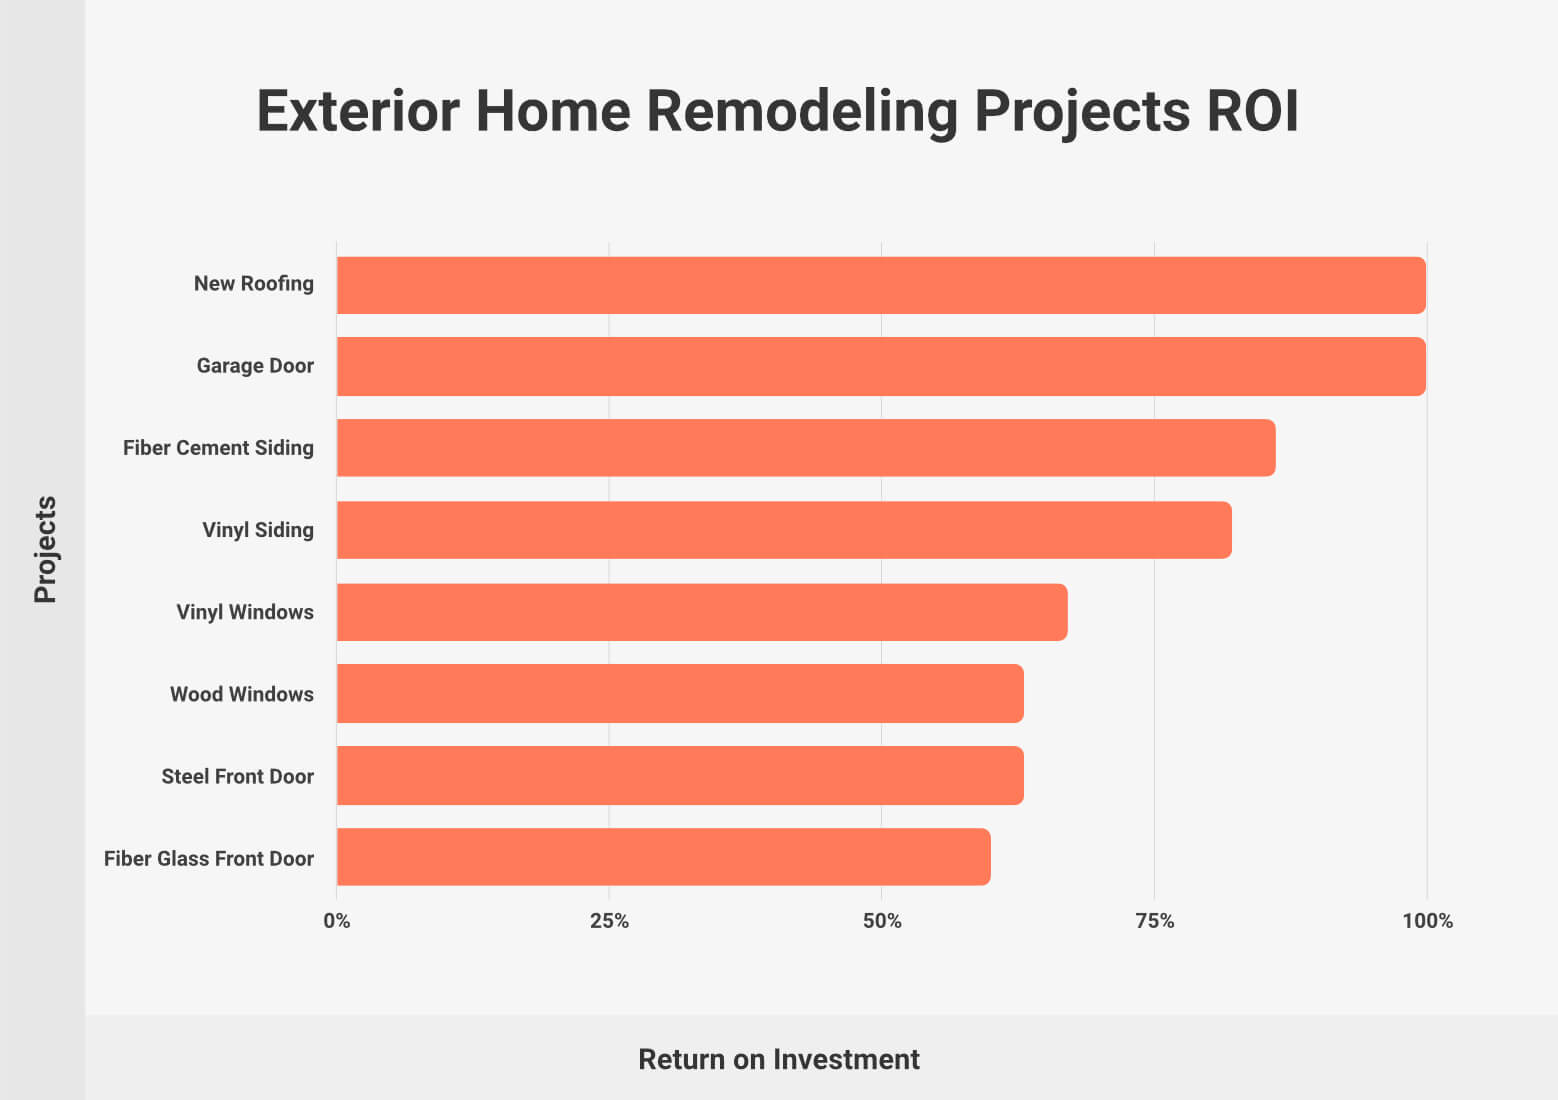 Exterior Home Remodeling Projects ROI